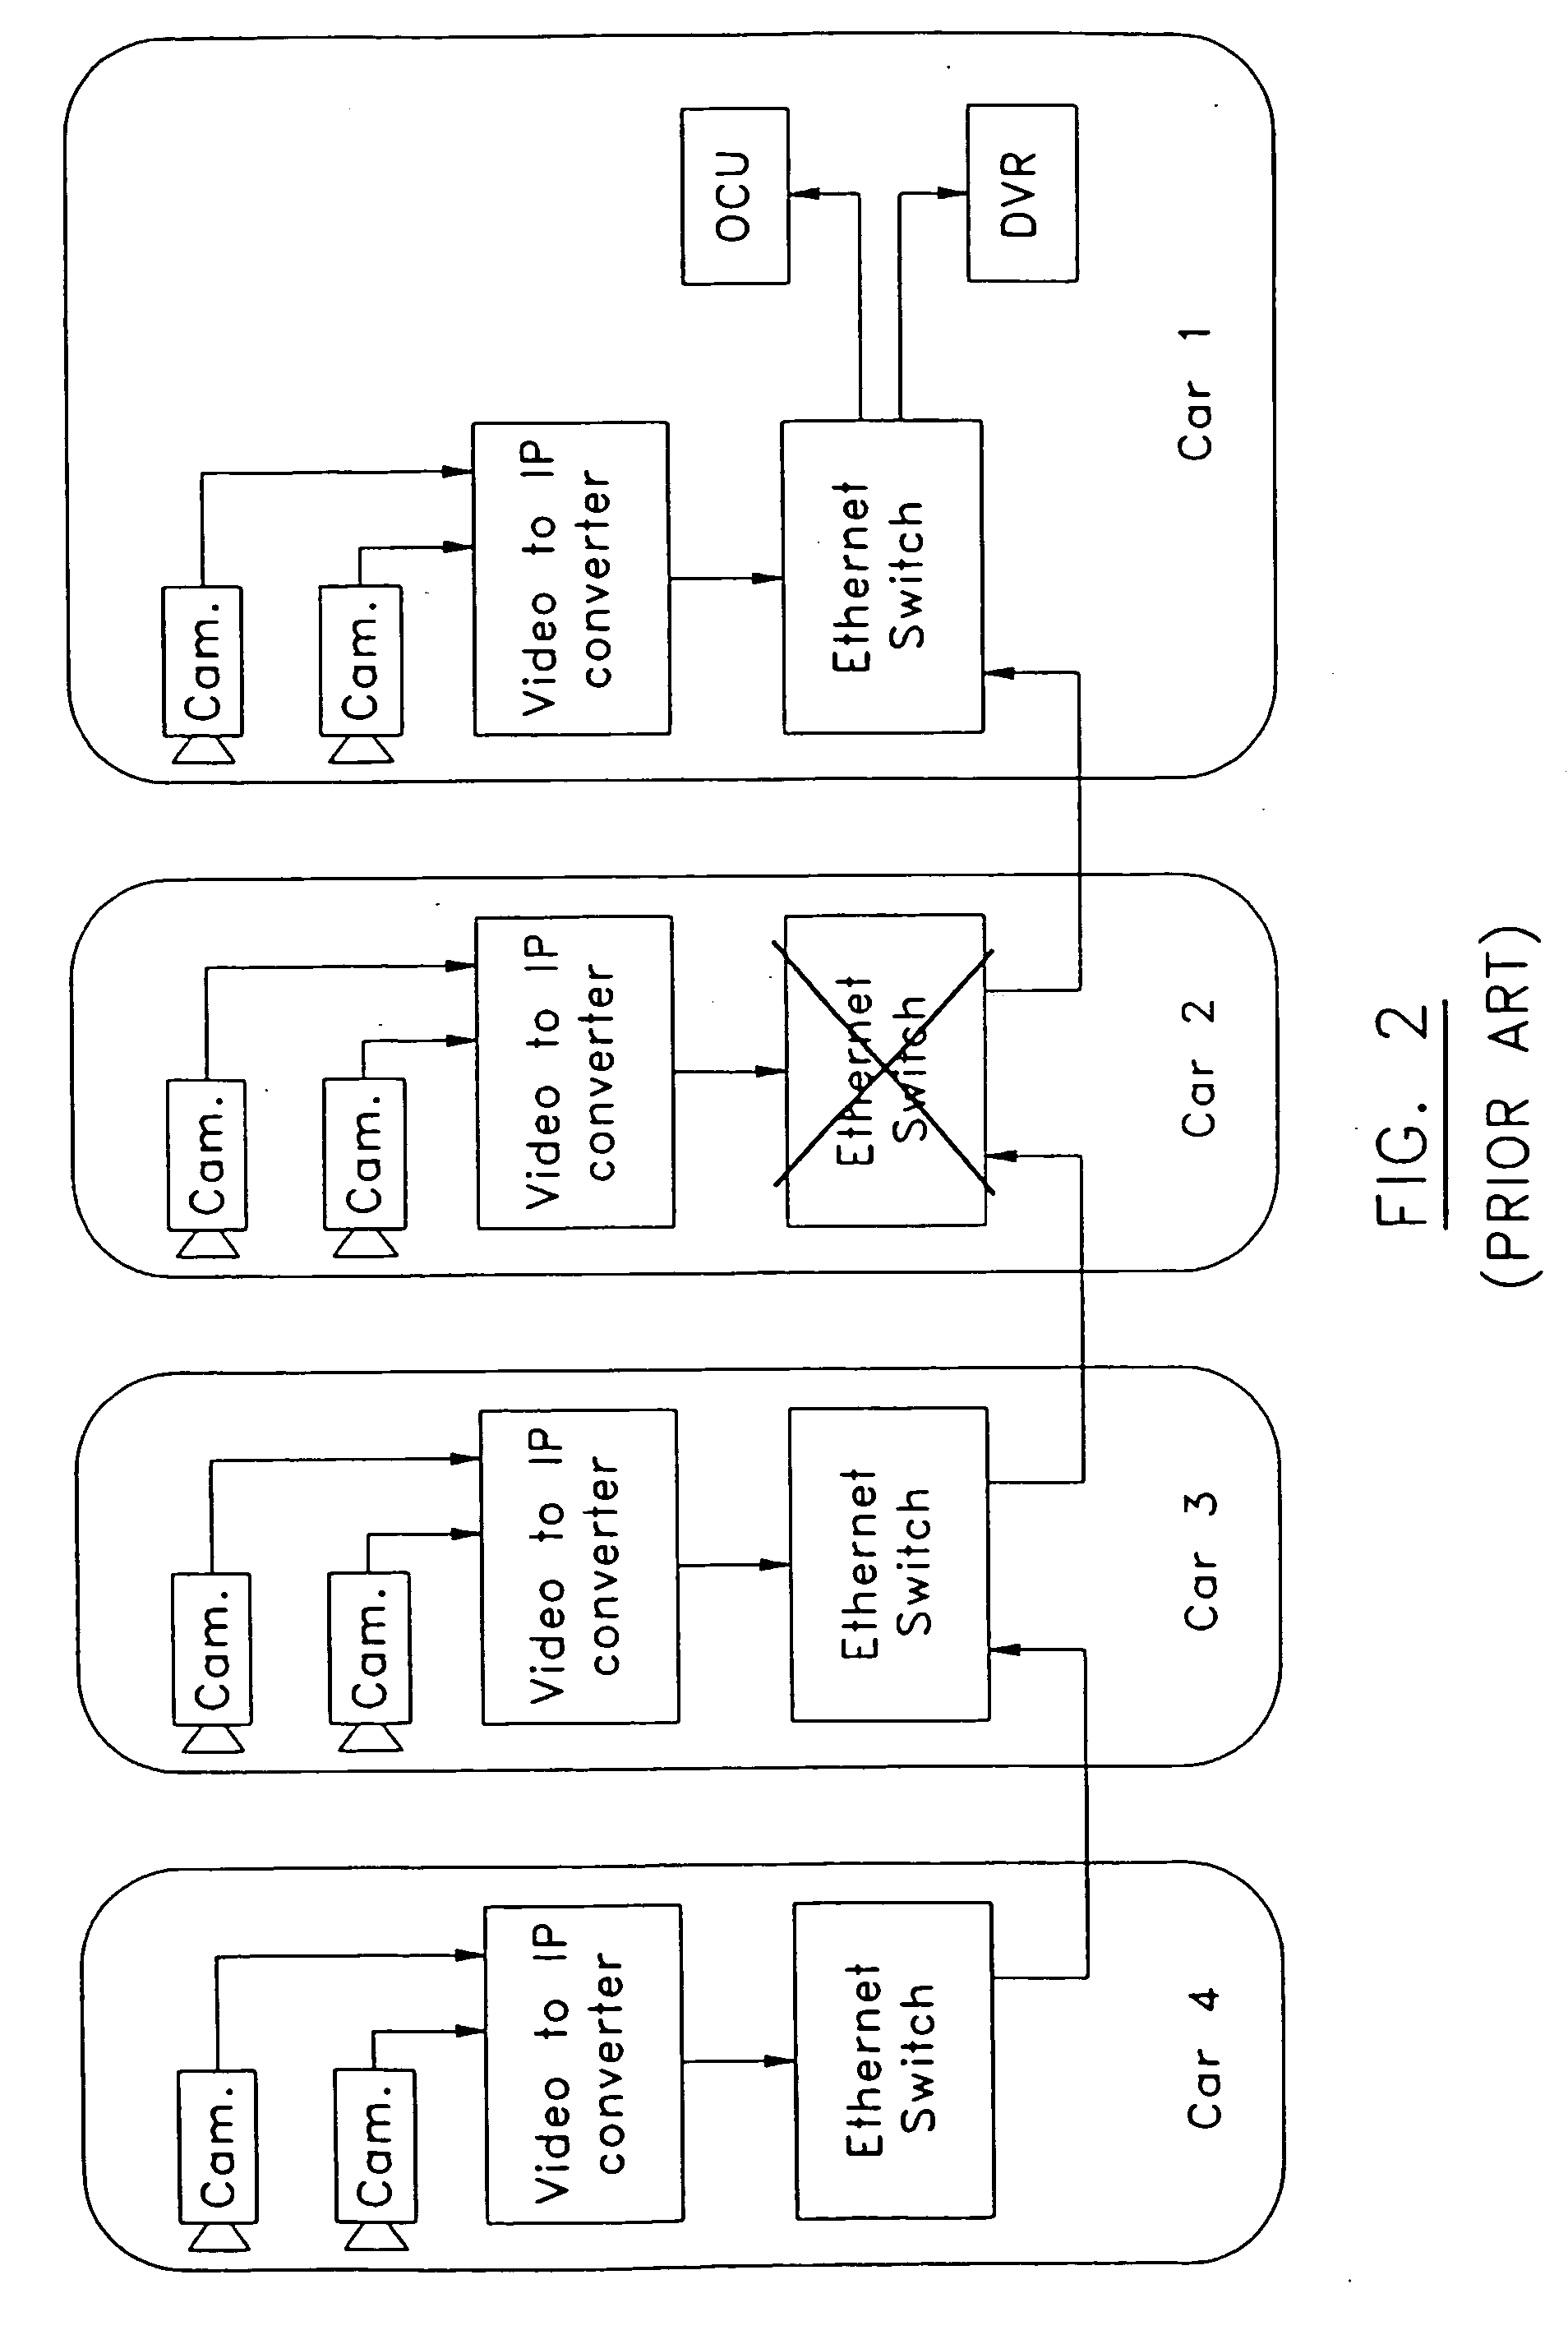 Ruggedized Analog Front-End for a Network Communicative Device in a Railway-Like Environment